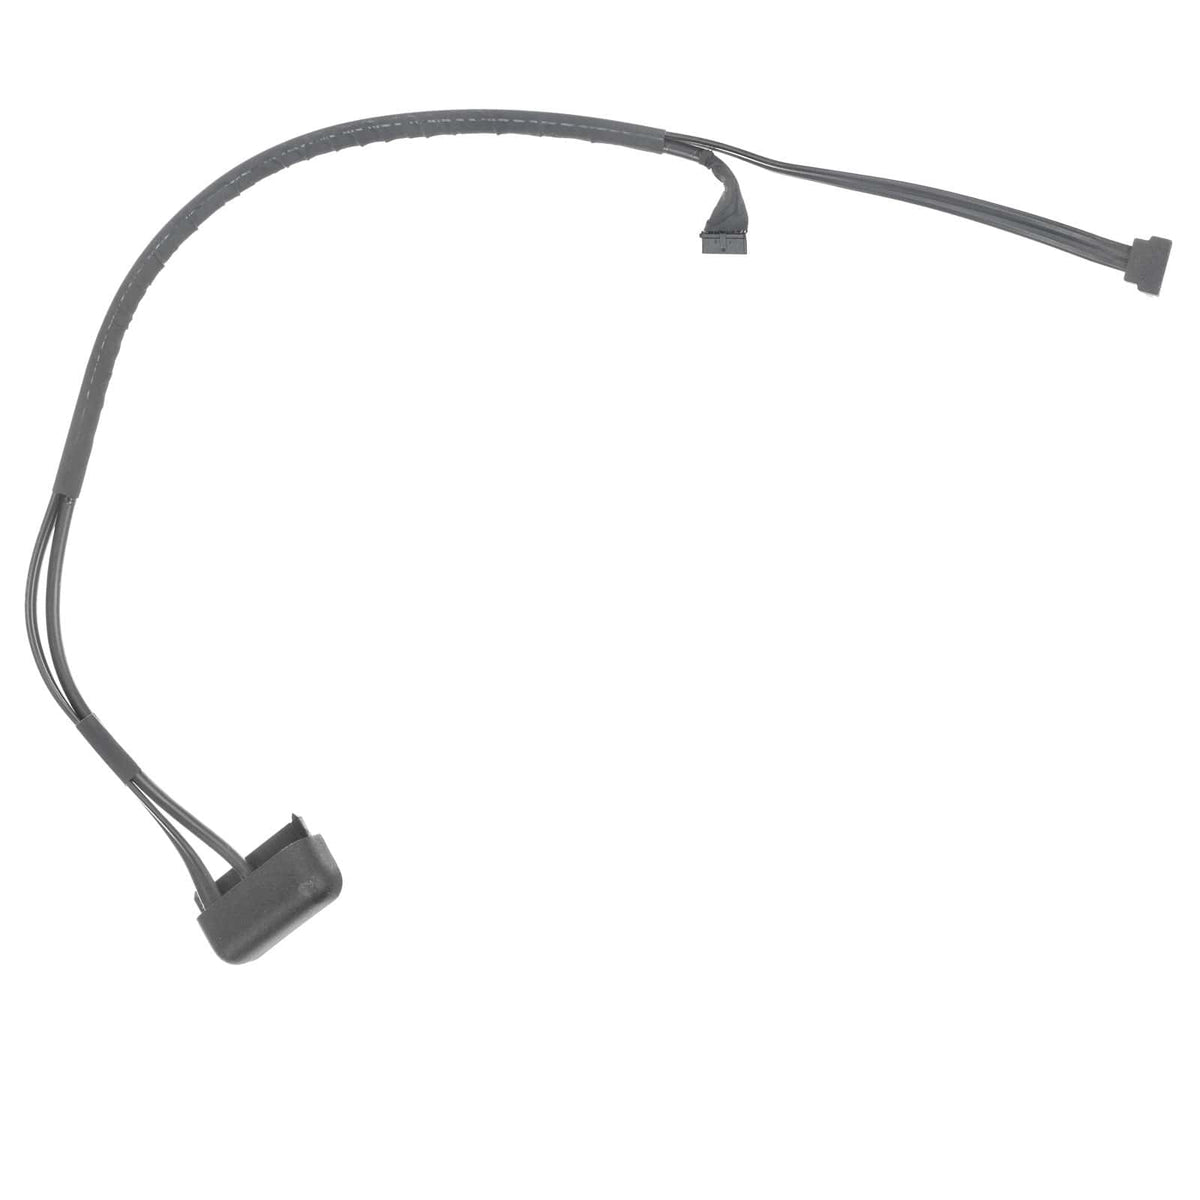 HARD DRIVE CABLE (HDC) FOR IMAC 27" A1419/A2115 (LATE 2015, EARLY 2019)